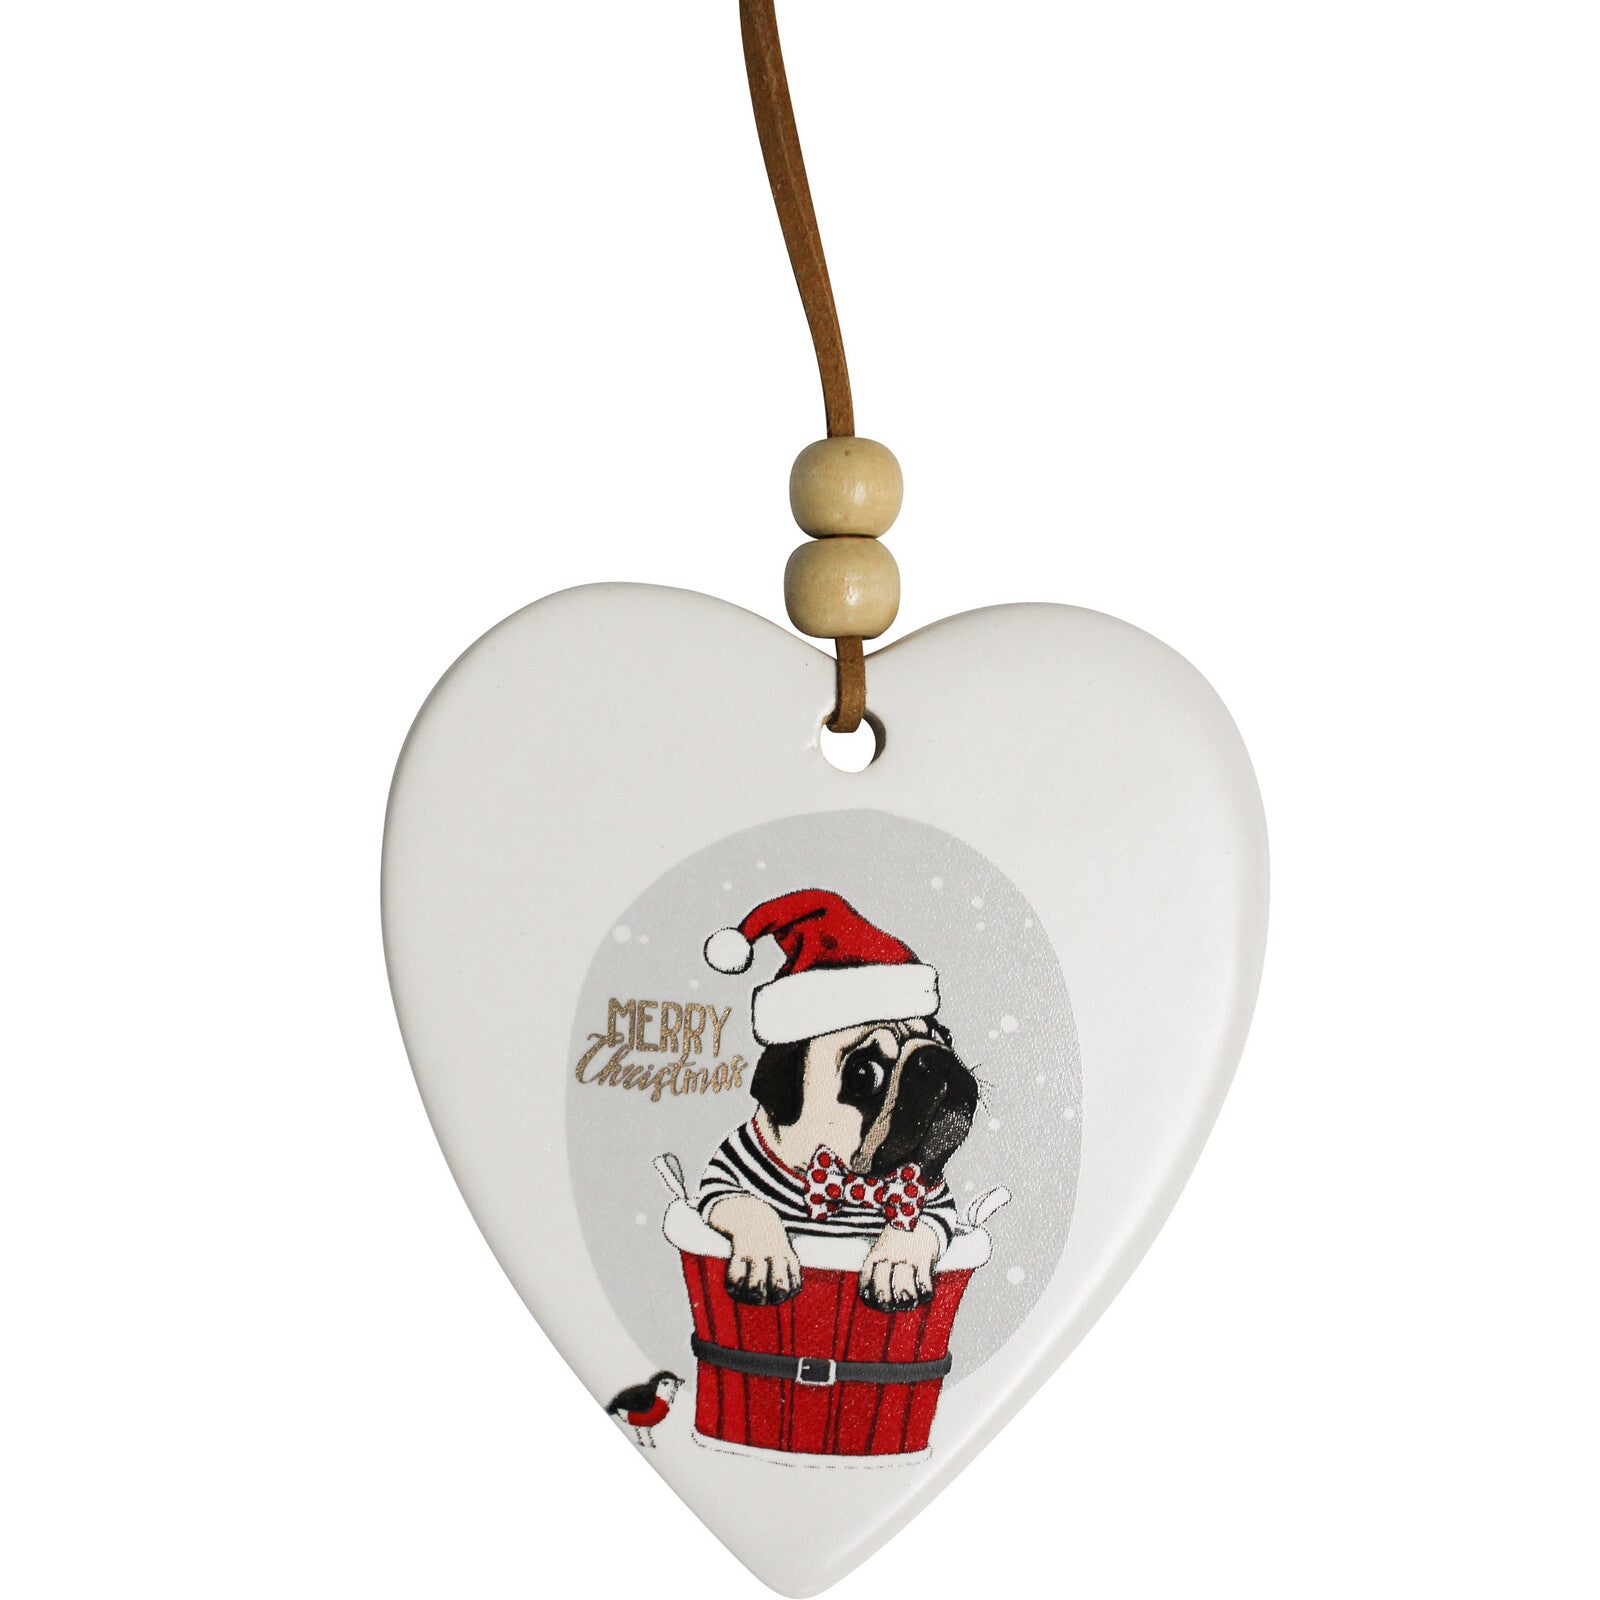 'Merry Christmas' Hanging Heart Ornament